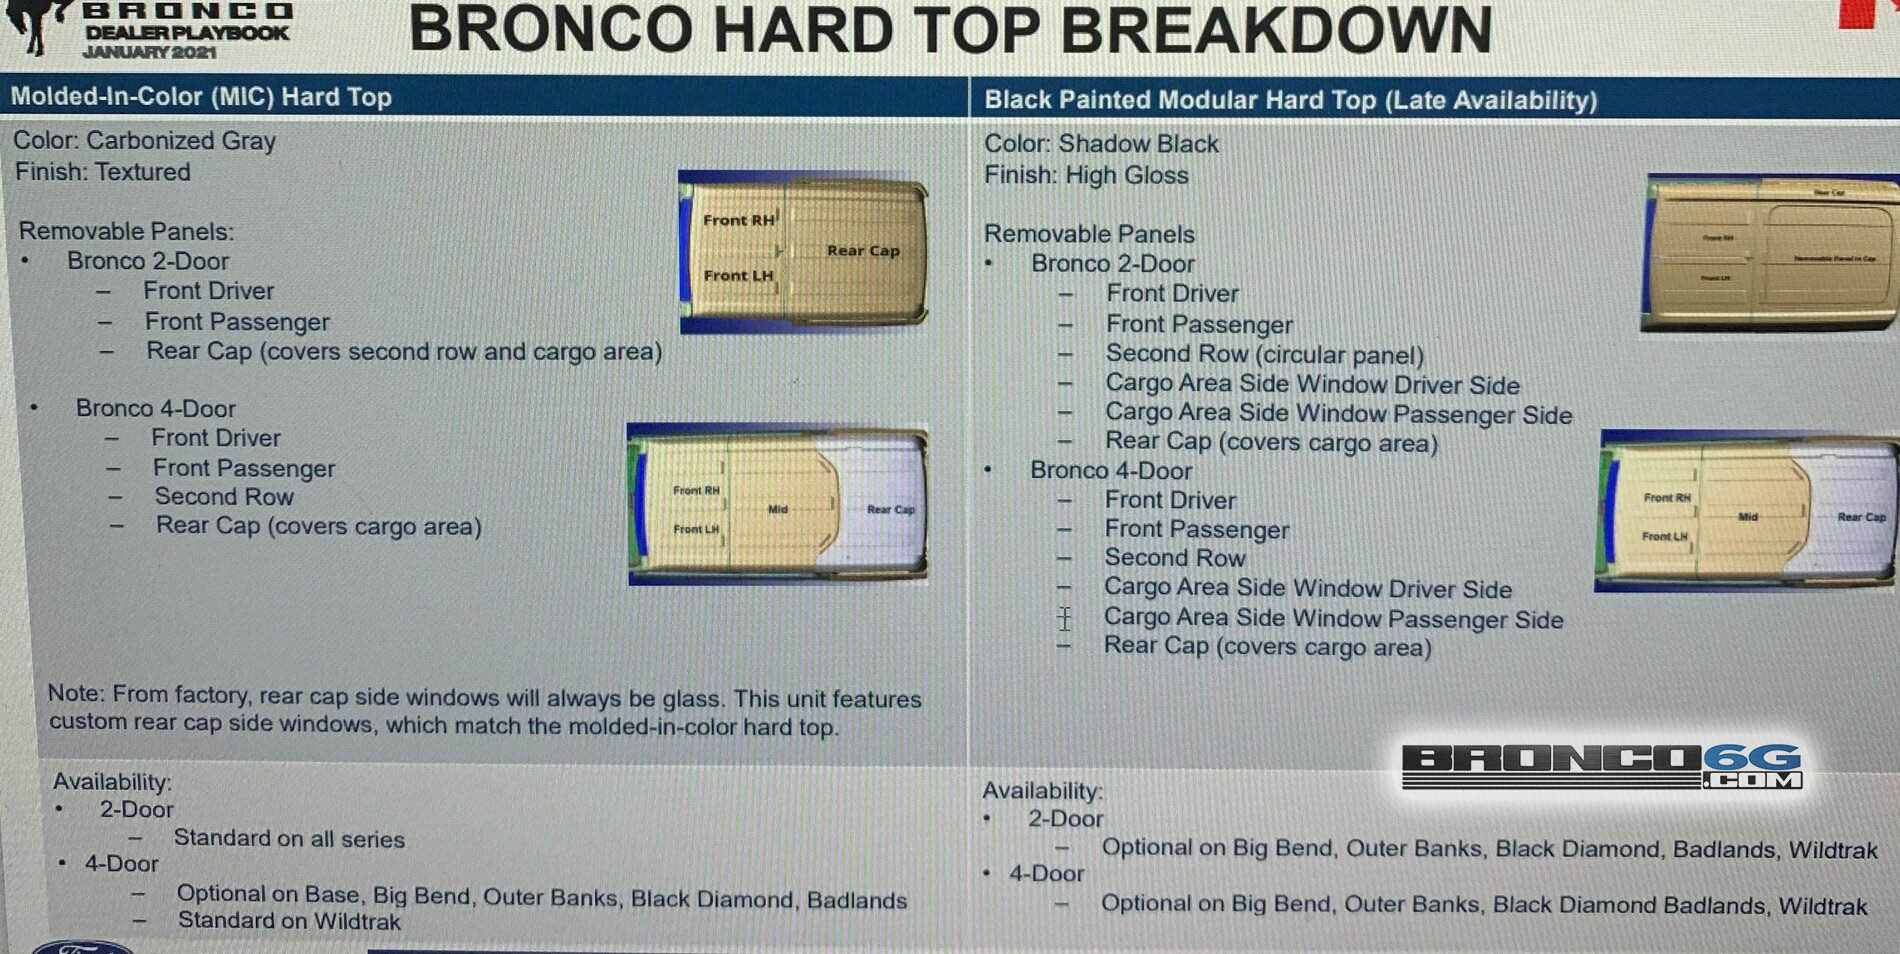 Ford Bronco “Bronco Dealer Playbook” describes MIC and MOD (Modular) top differences. Shows larger “Gunner’s Hatch” and confirms removable rear windows. 2021 Bronco hardtop MIC vs Modular MOD top differences - Gunner's Hatch - removable rear windo